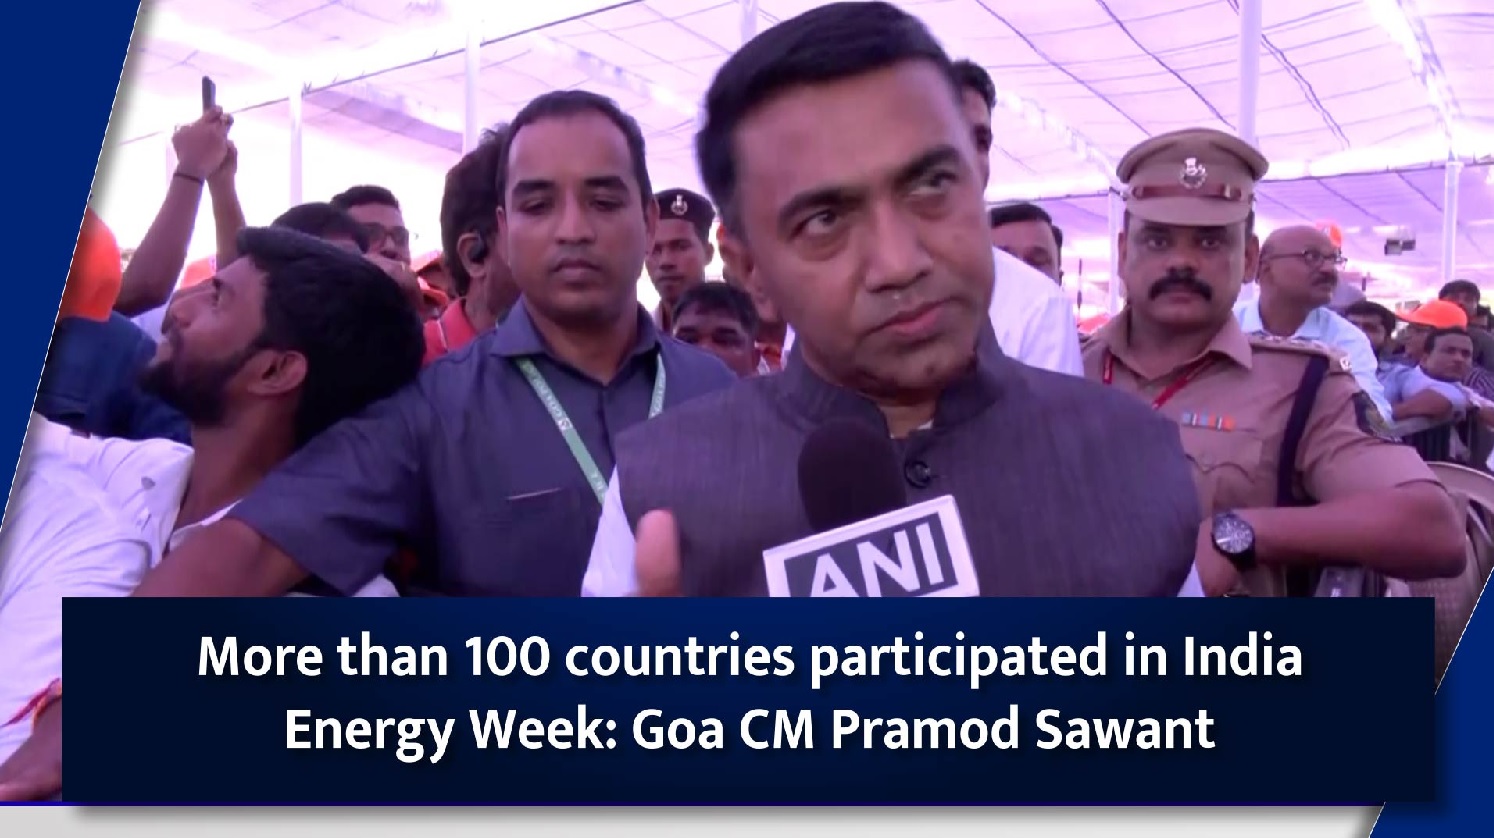 More than 100 countries participated in India Energy Week: Goa CM Pramod Sawant